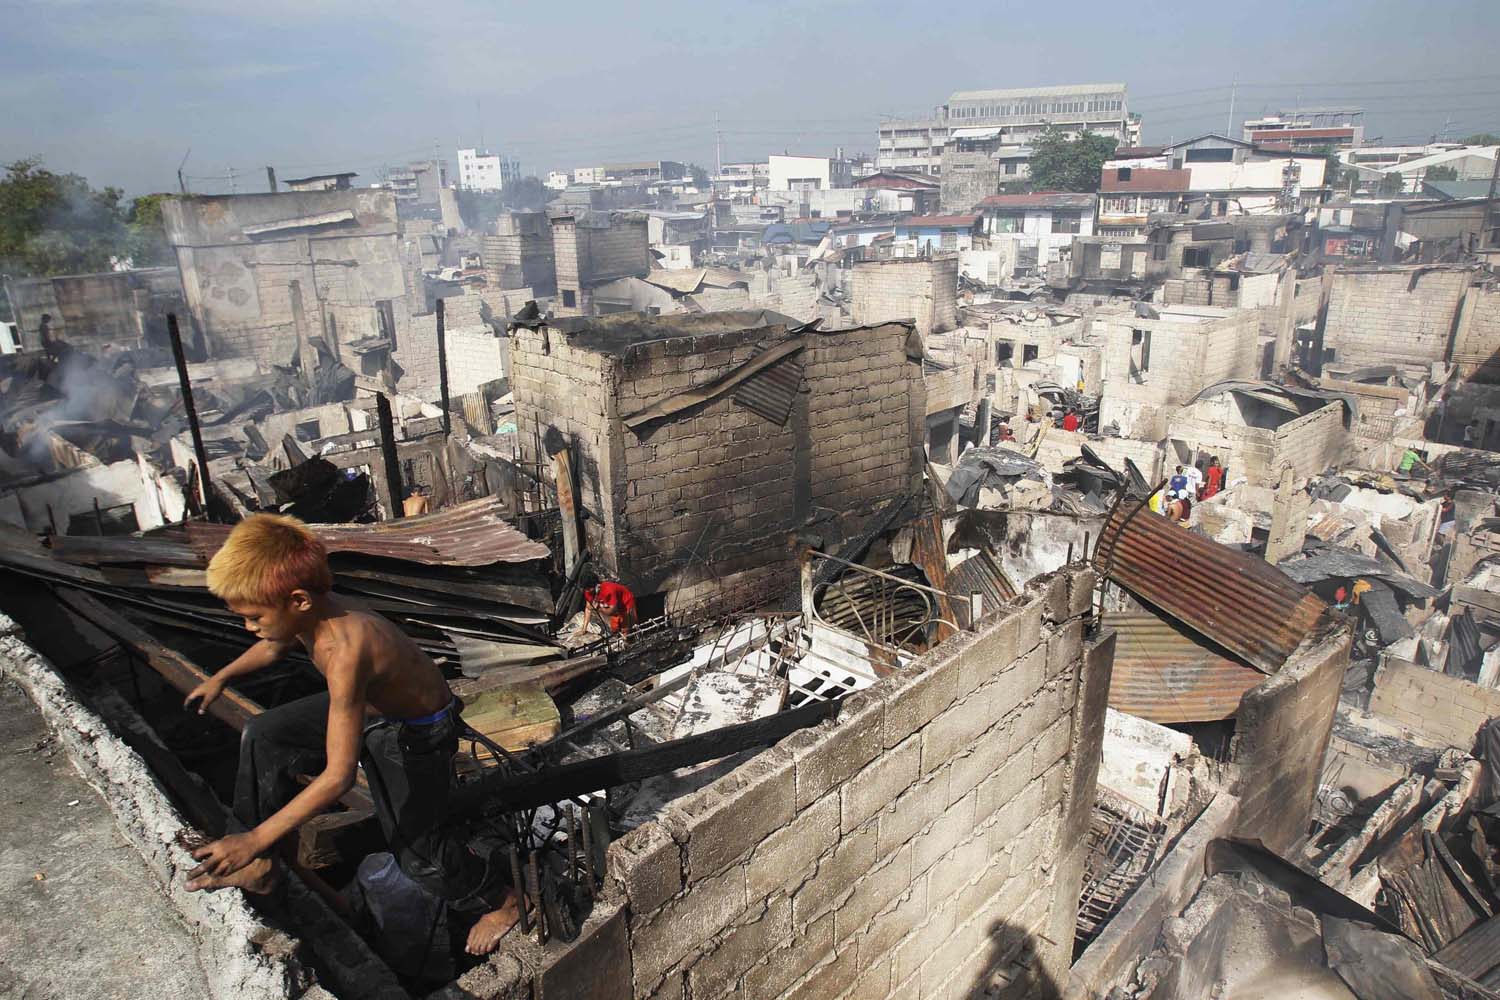 A boy climbs out of a charred shanty as he collects reusable materials after a fire razed through a slum area in Caloocan City, Metro Manila